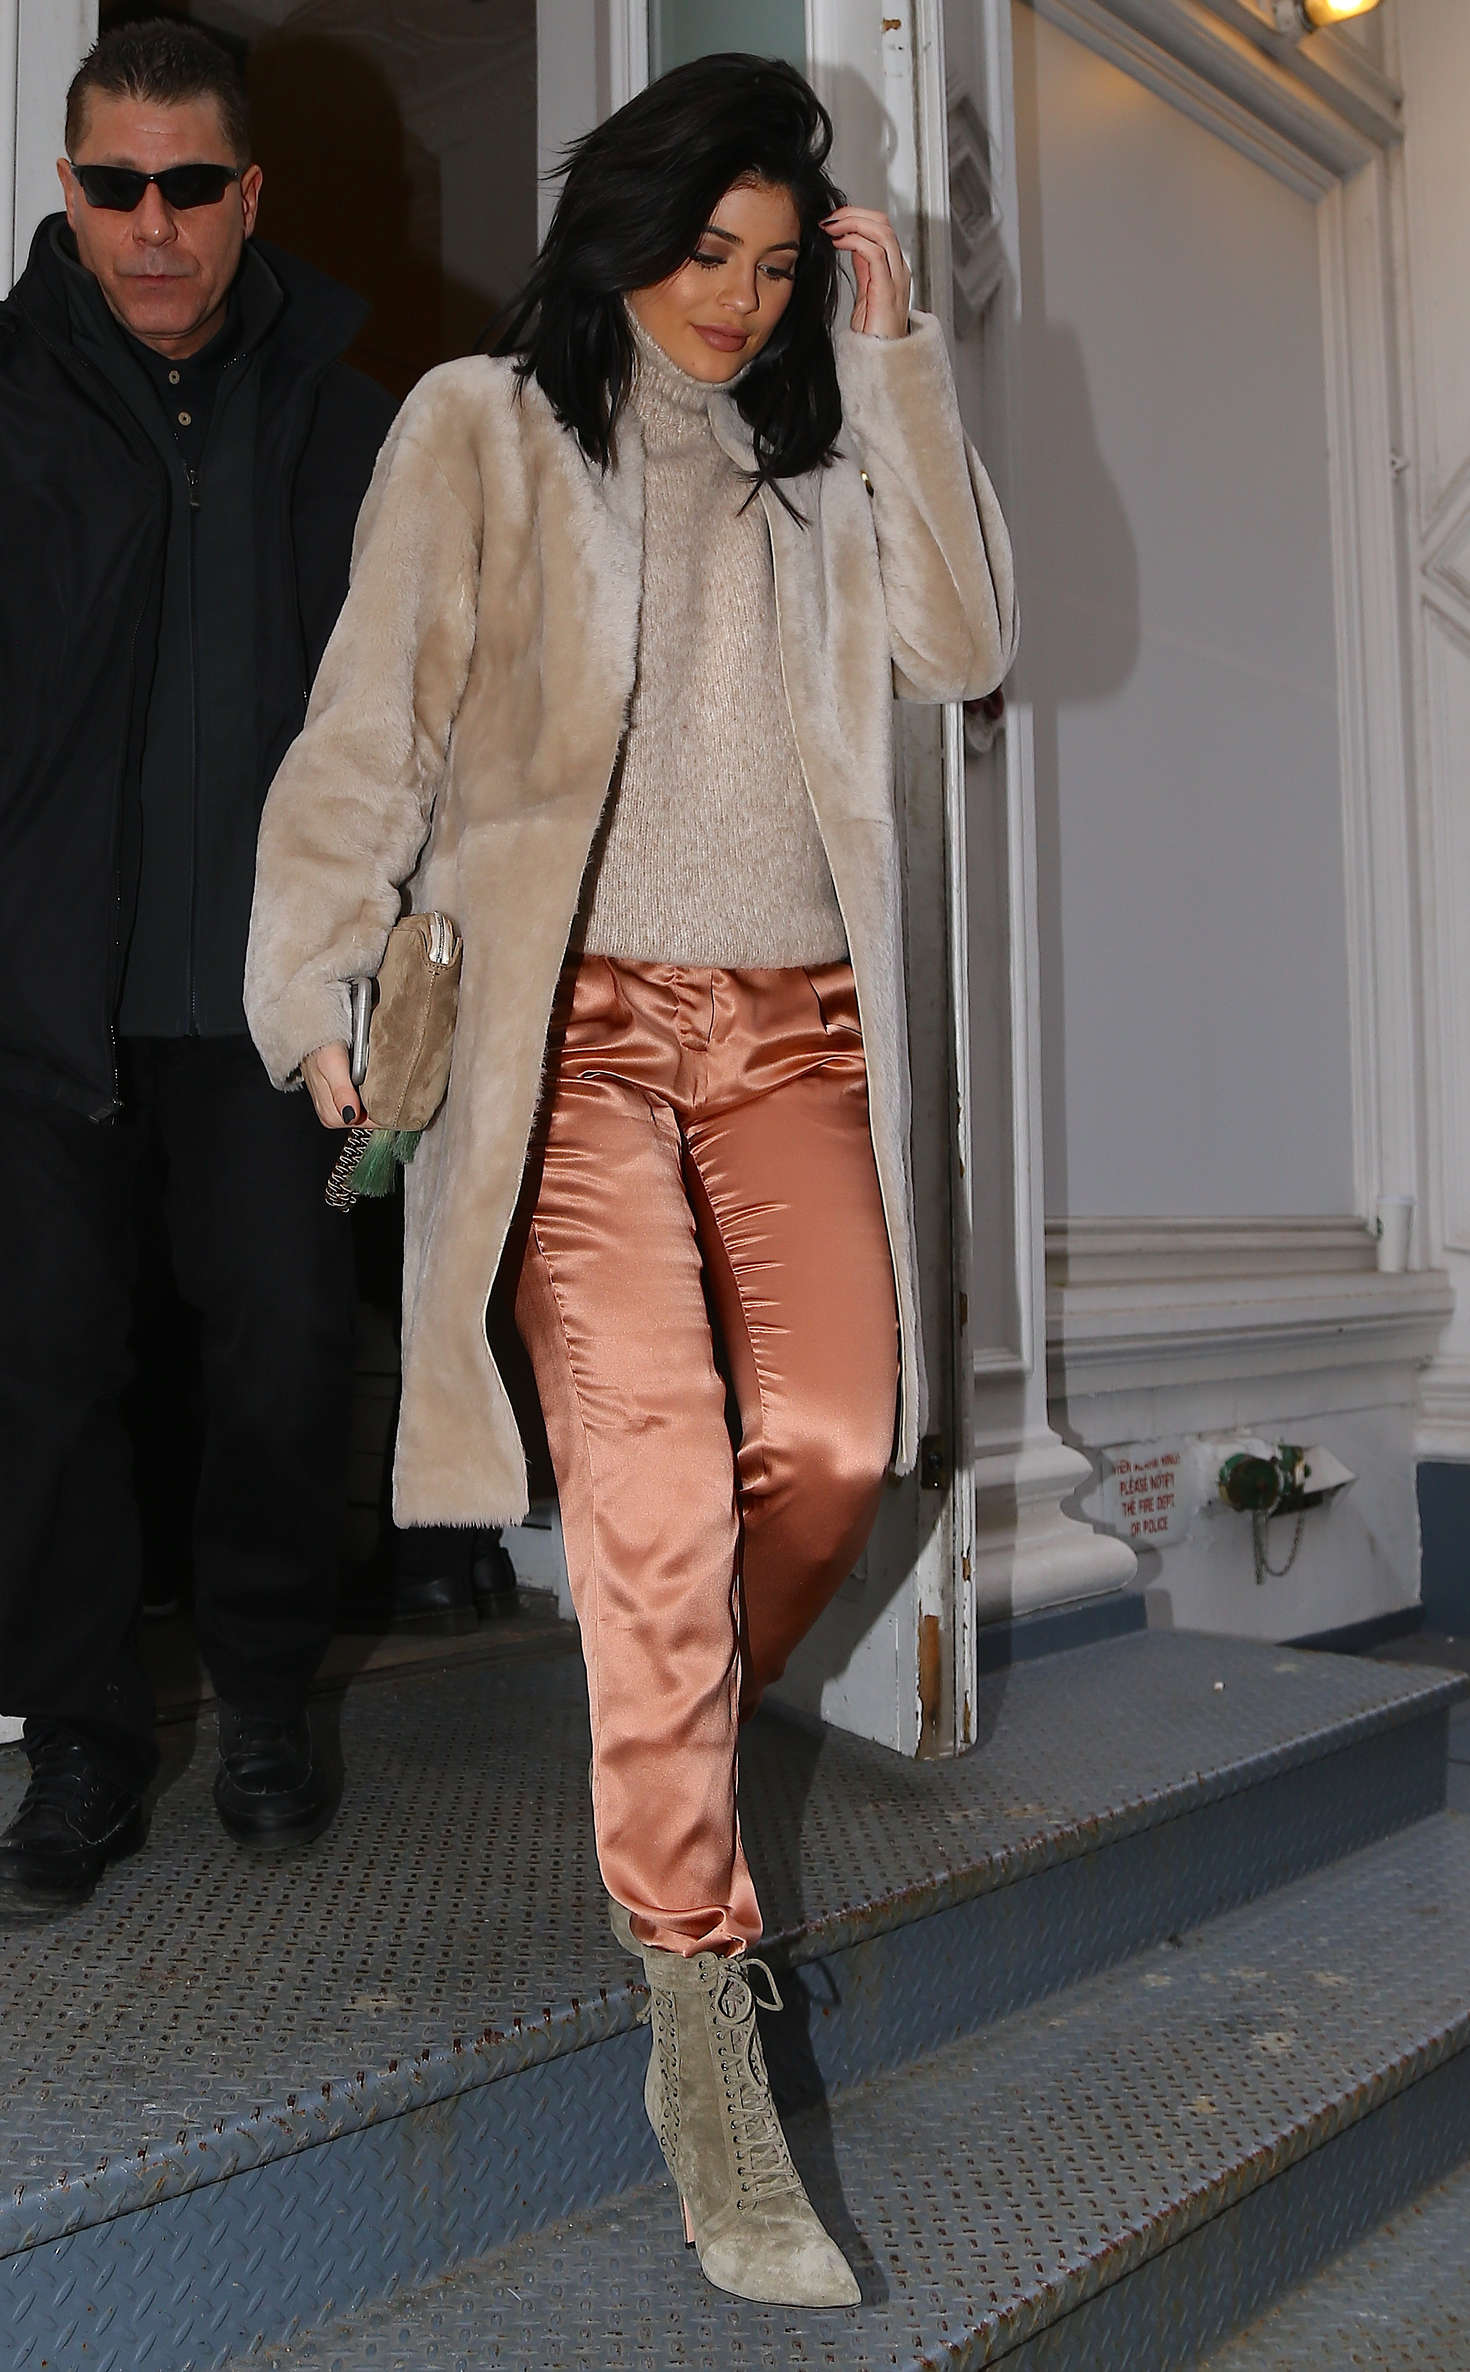 Kylie Jenner out and about in New York